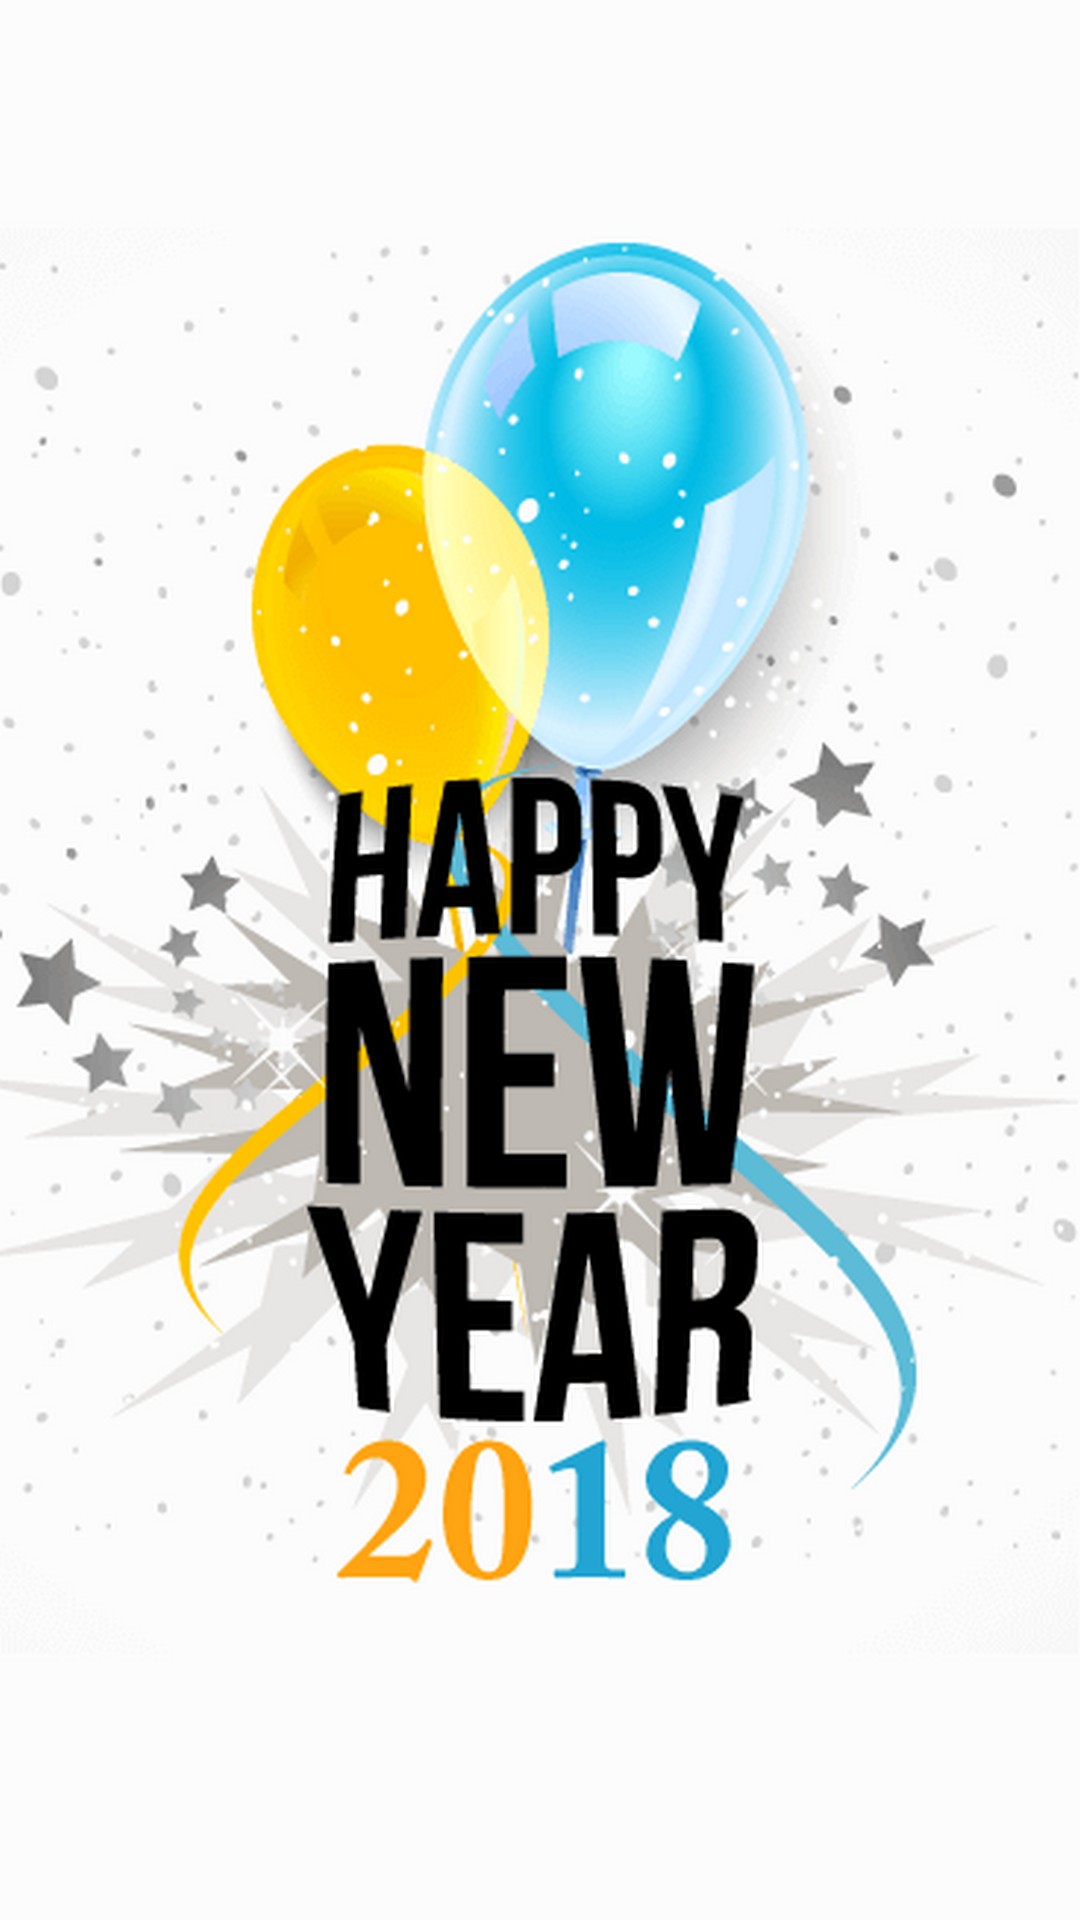 Happy New Year 2018 iPhone Wallpaper resolution 1080x1920